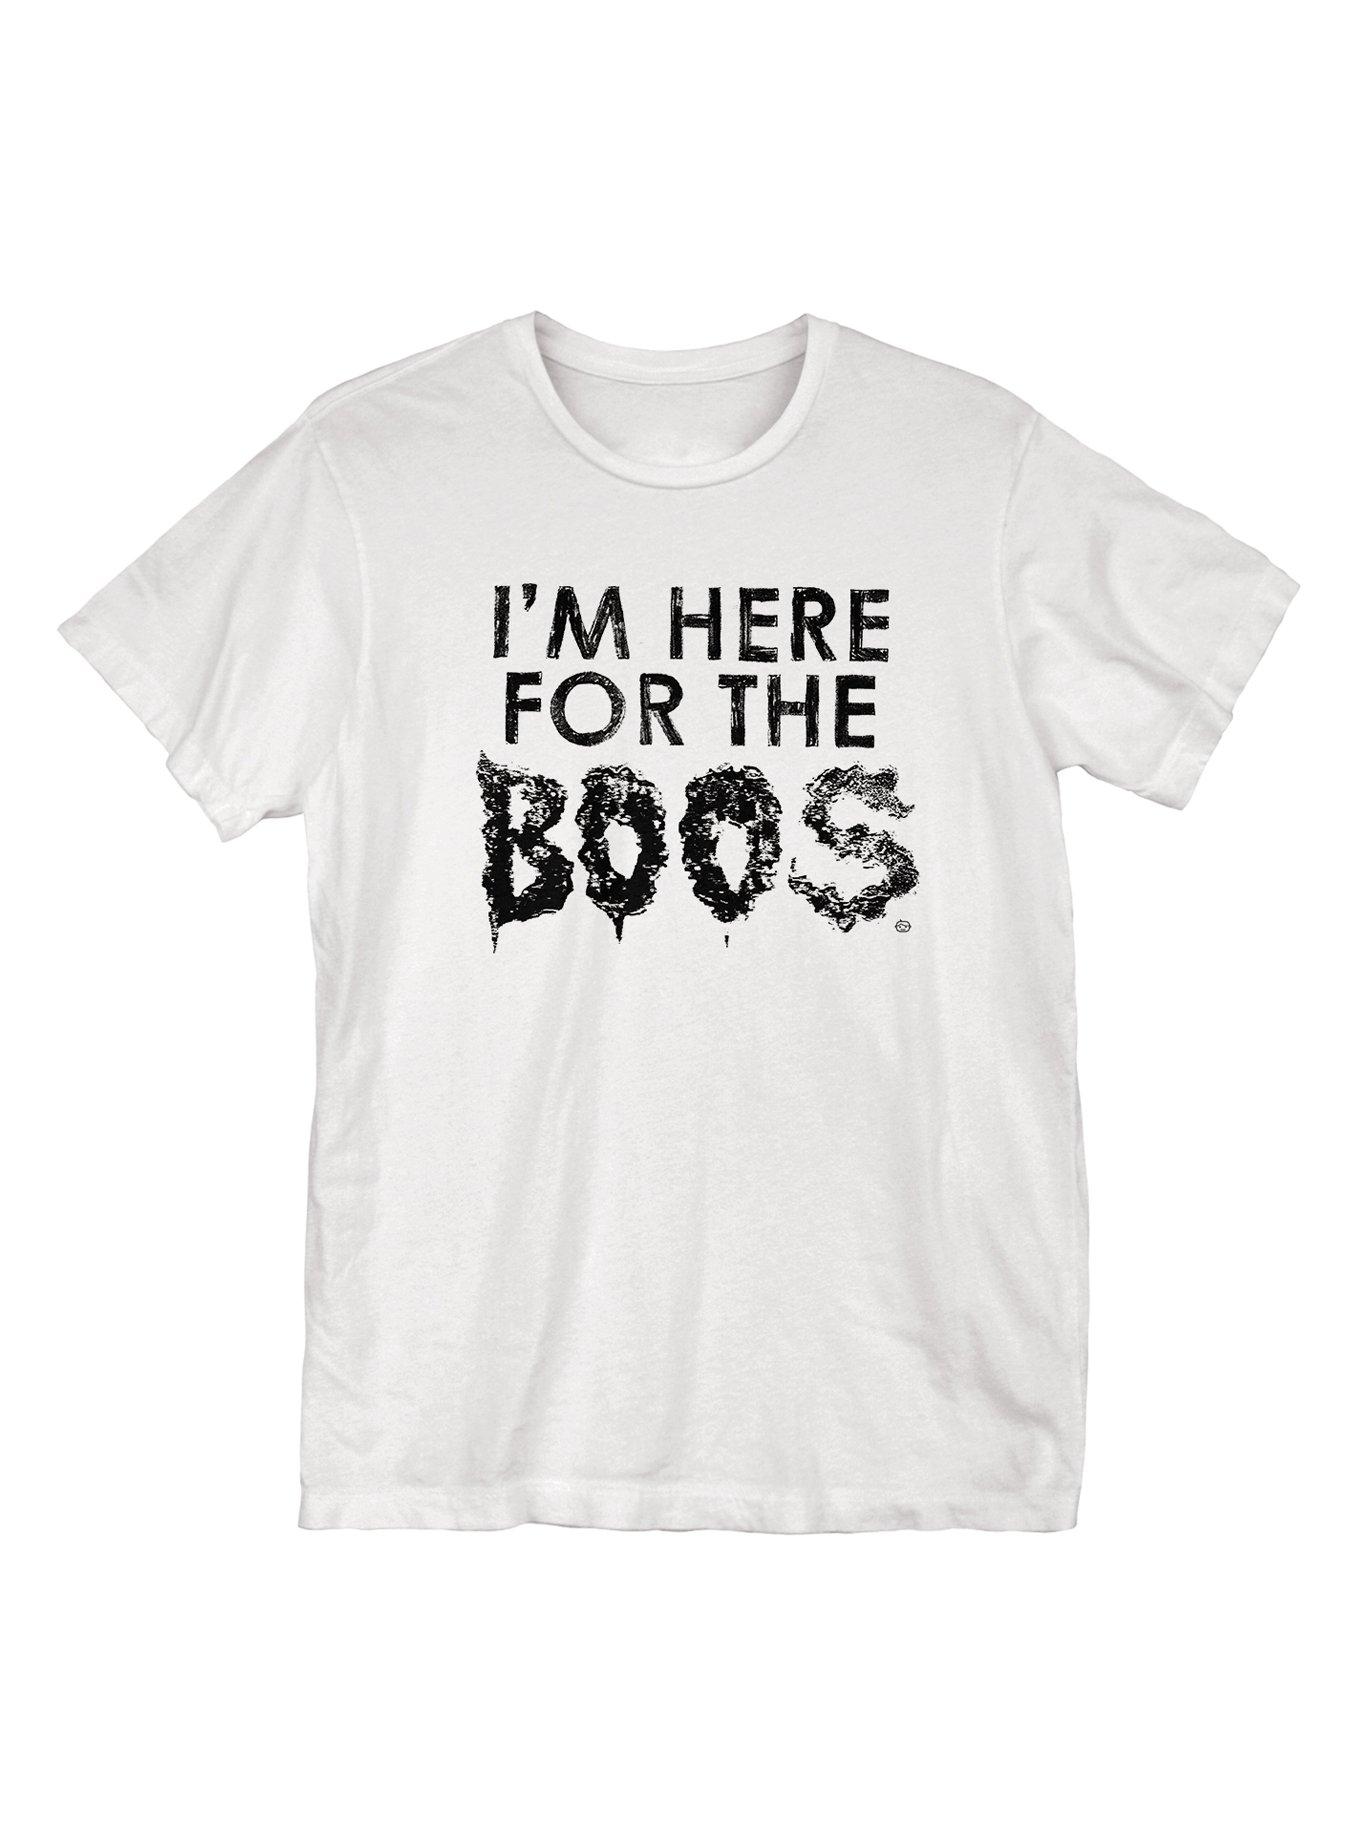 Here For The Boos T-Shirt, WHITE, hi-res